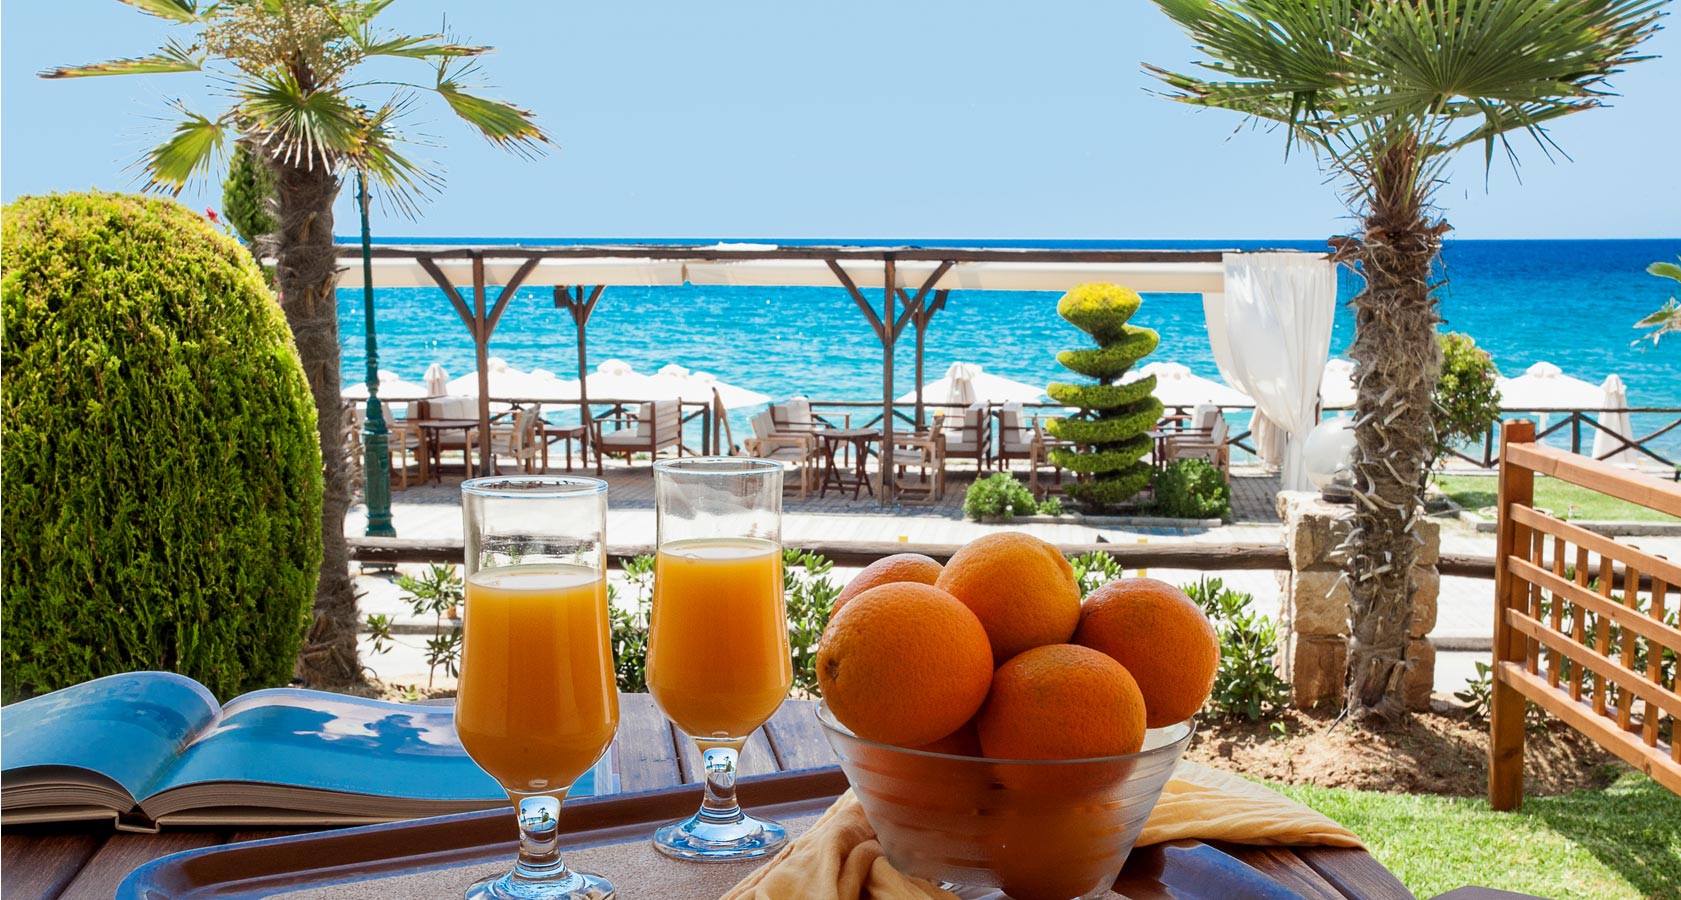 Enjoy your favorite refreshment, juice or drink overlooking the sea